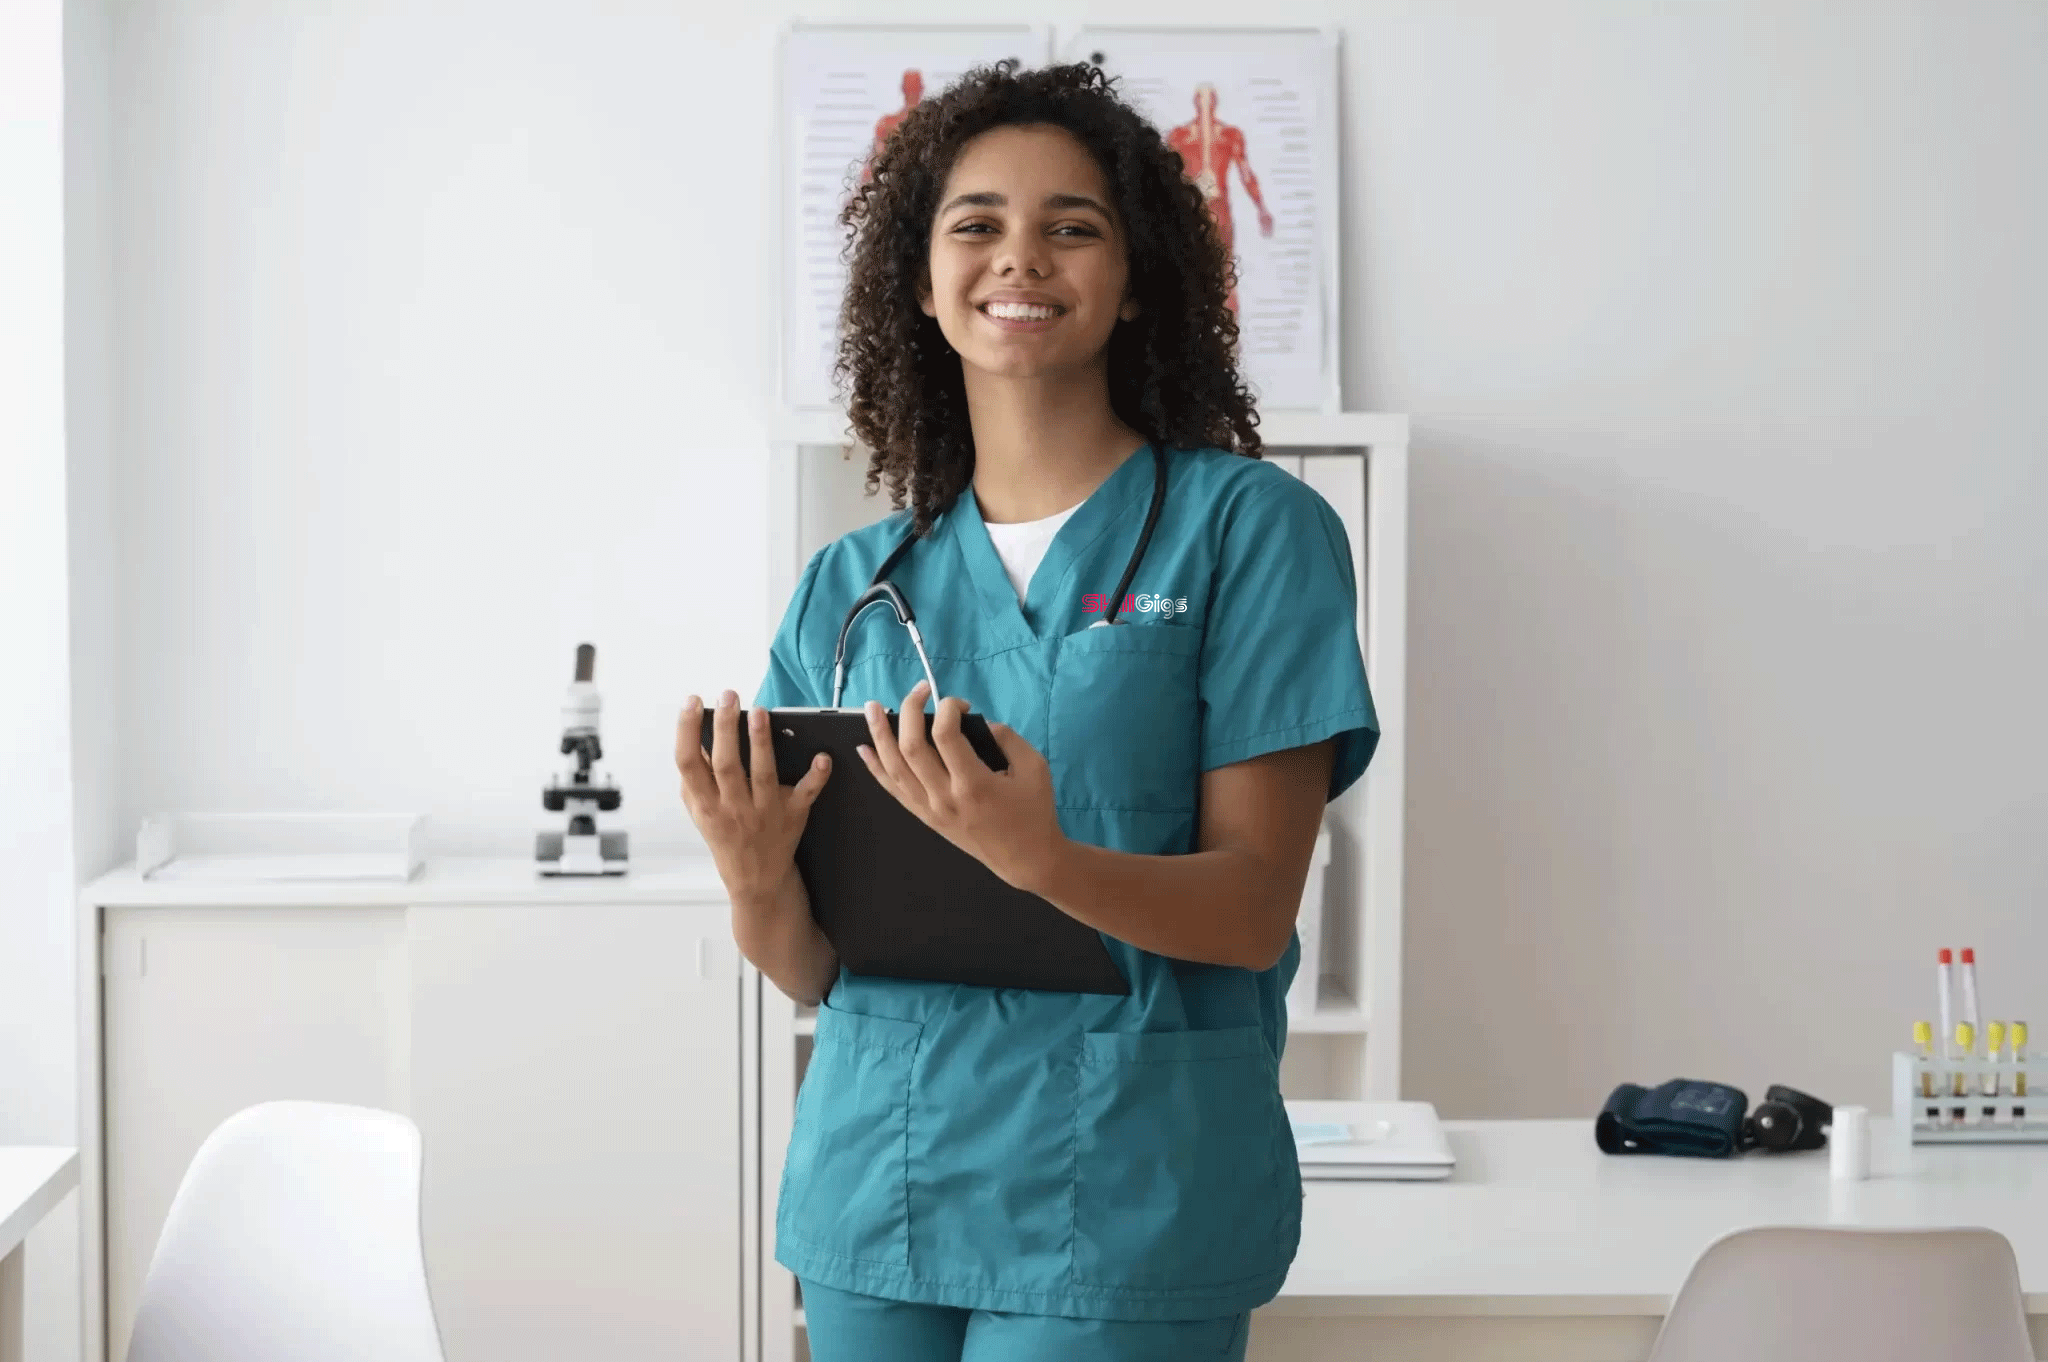 A Travel Nurse in scrubs holding a resume guide.